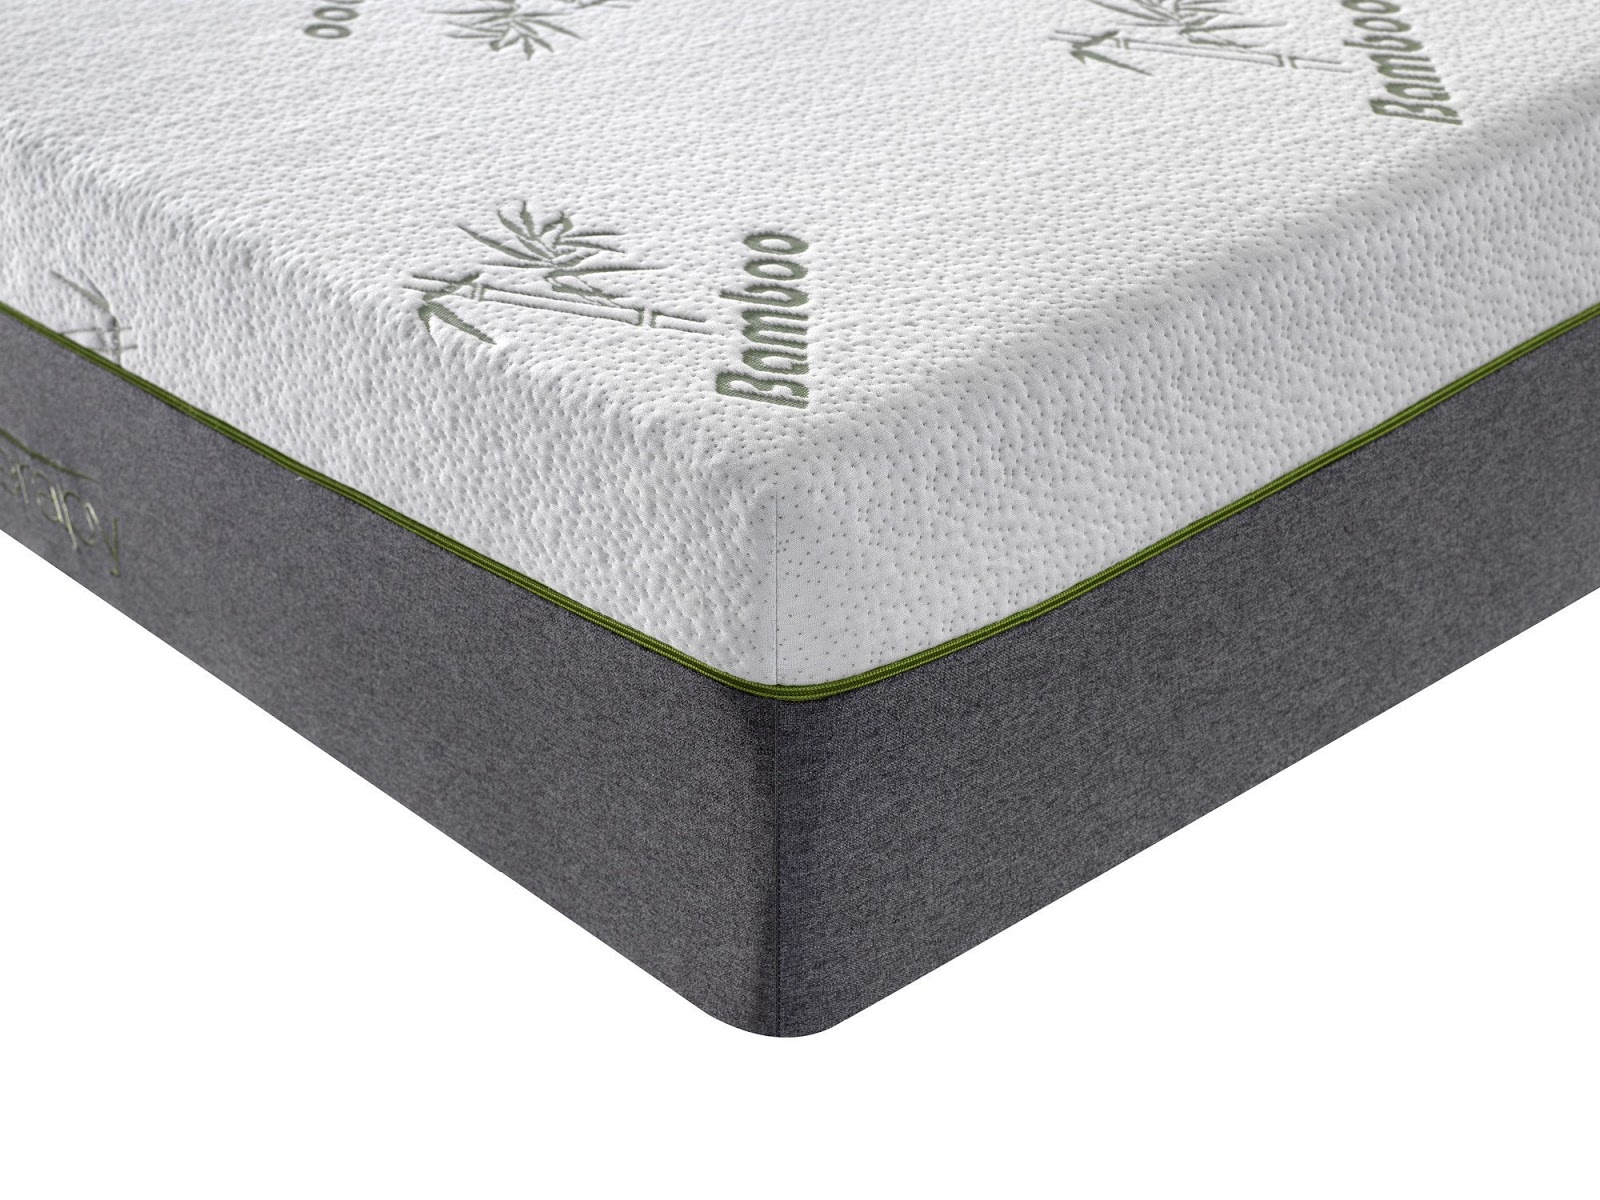 can a bamboo mattress cover cause pain